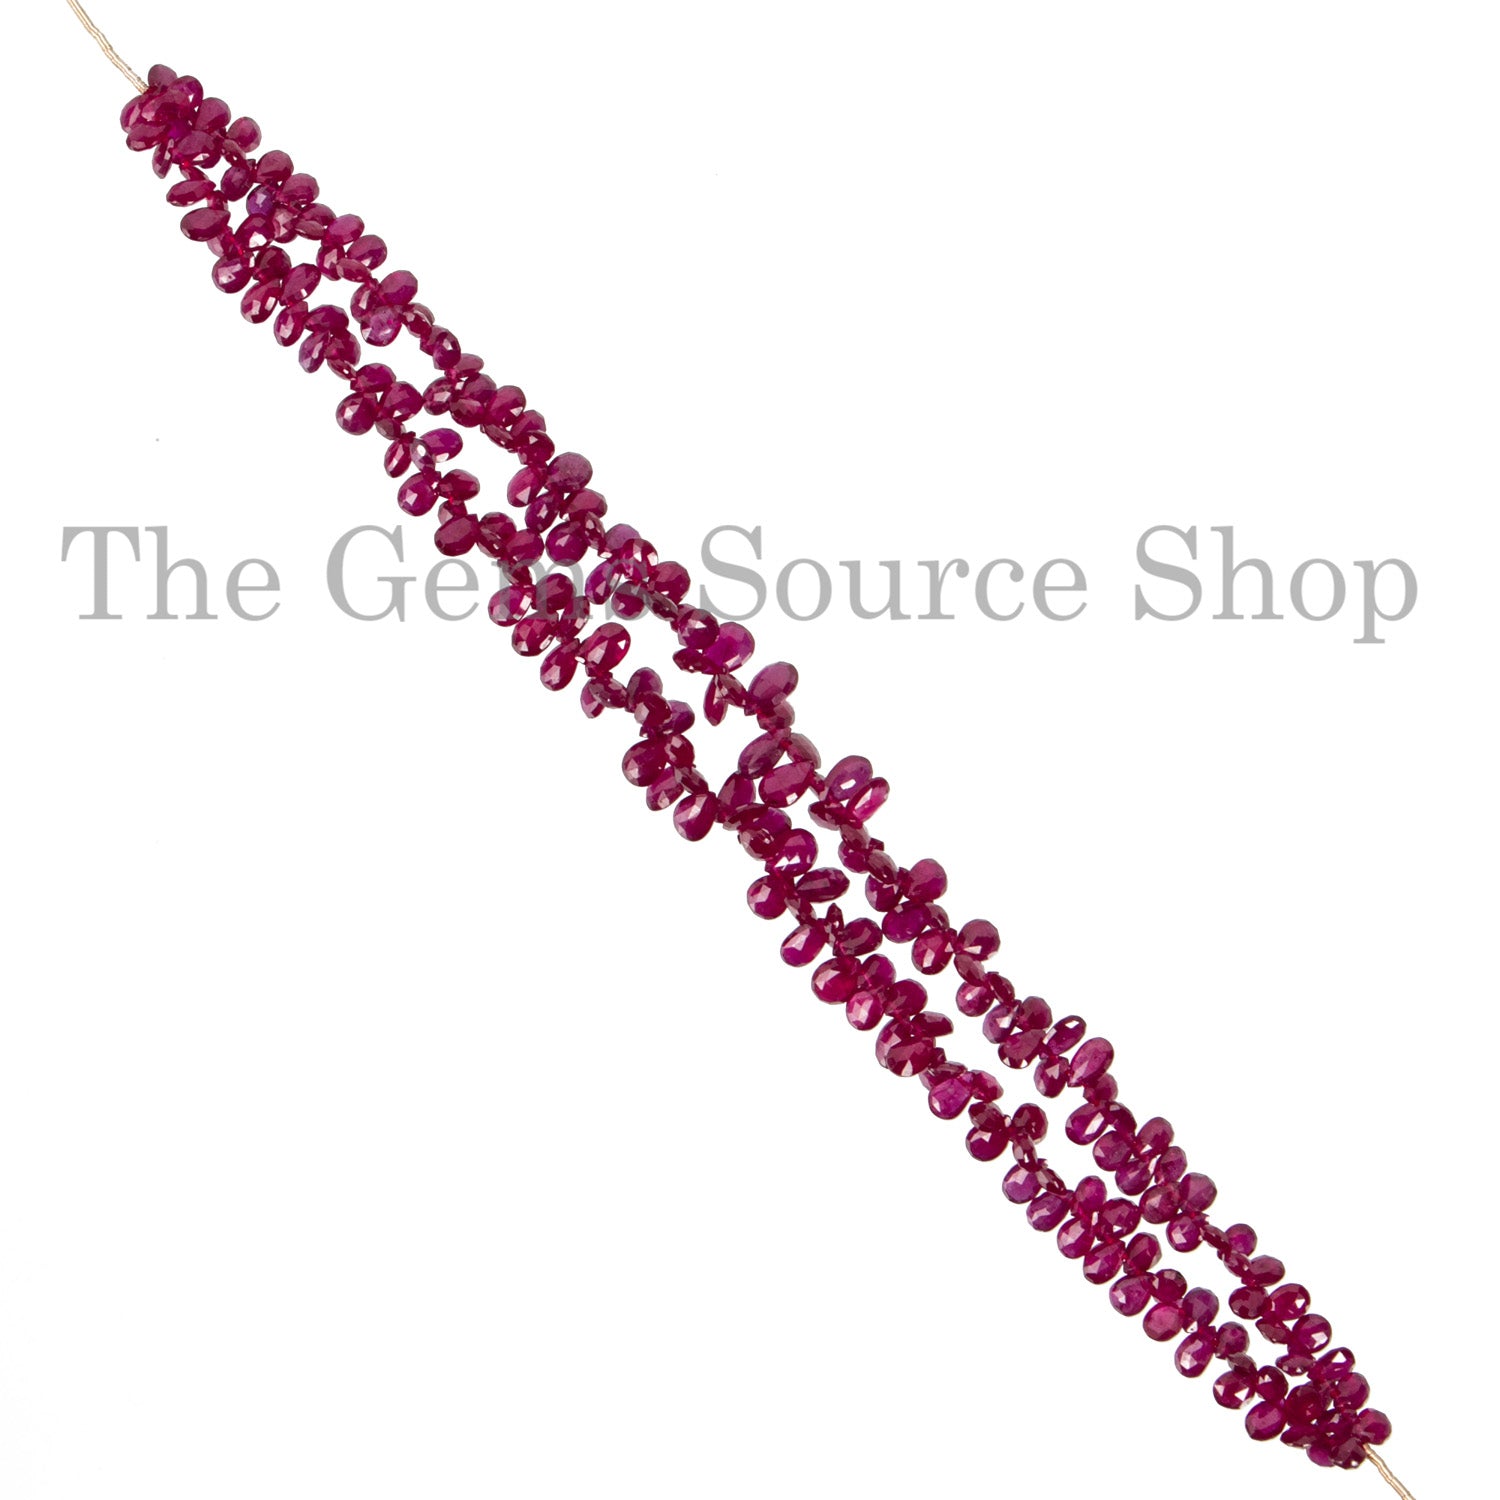 Natural Mozambique Ruby Beads, Pear Shape Briolette, Faceted Gemstone Beads